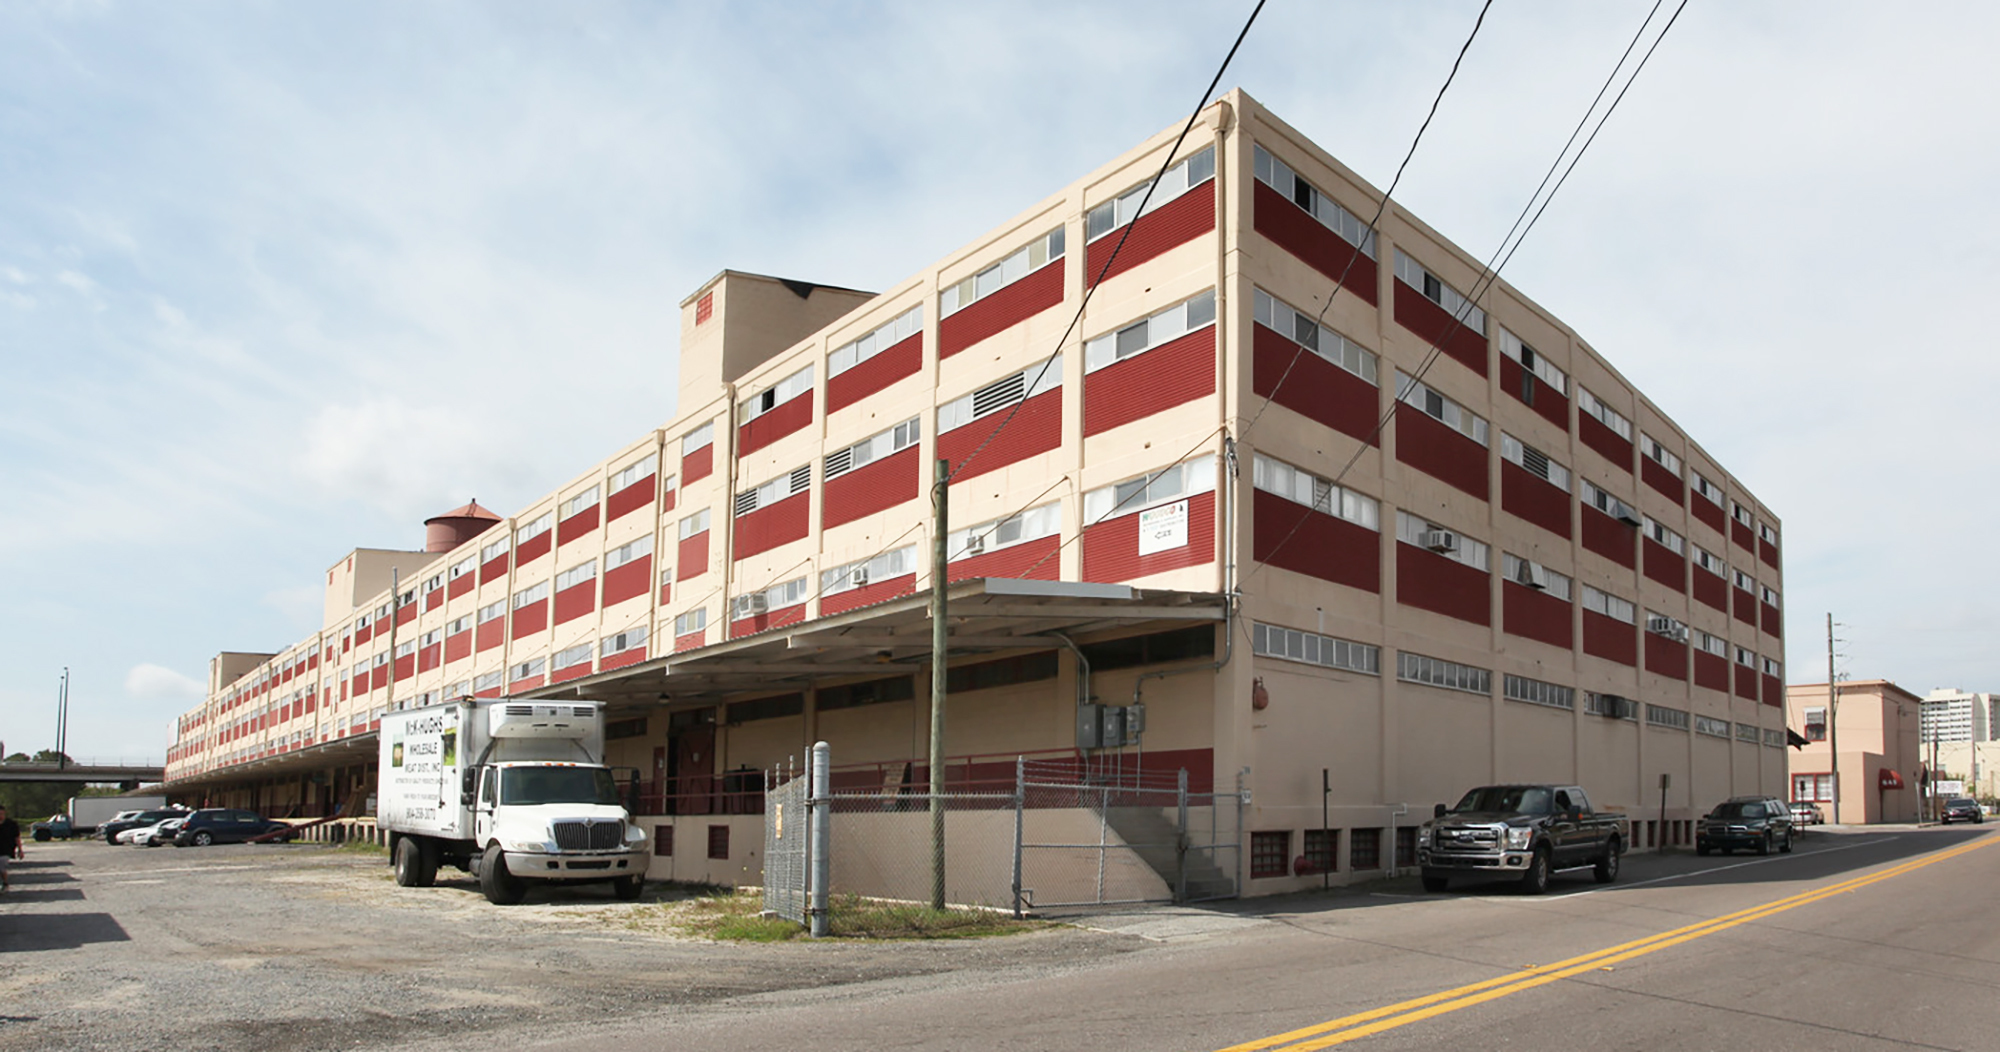 The 106-year-old, 330,000-square-foot, four-story warehouse and six more warehouse and office buildings constructed between 1912 and 1990.